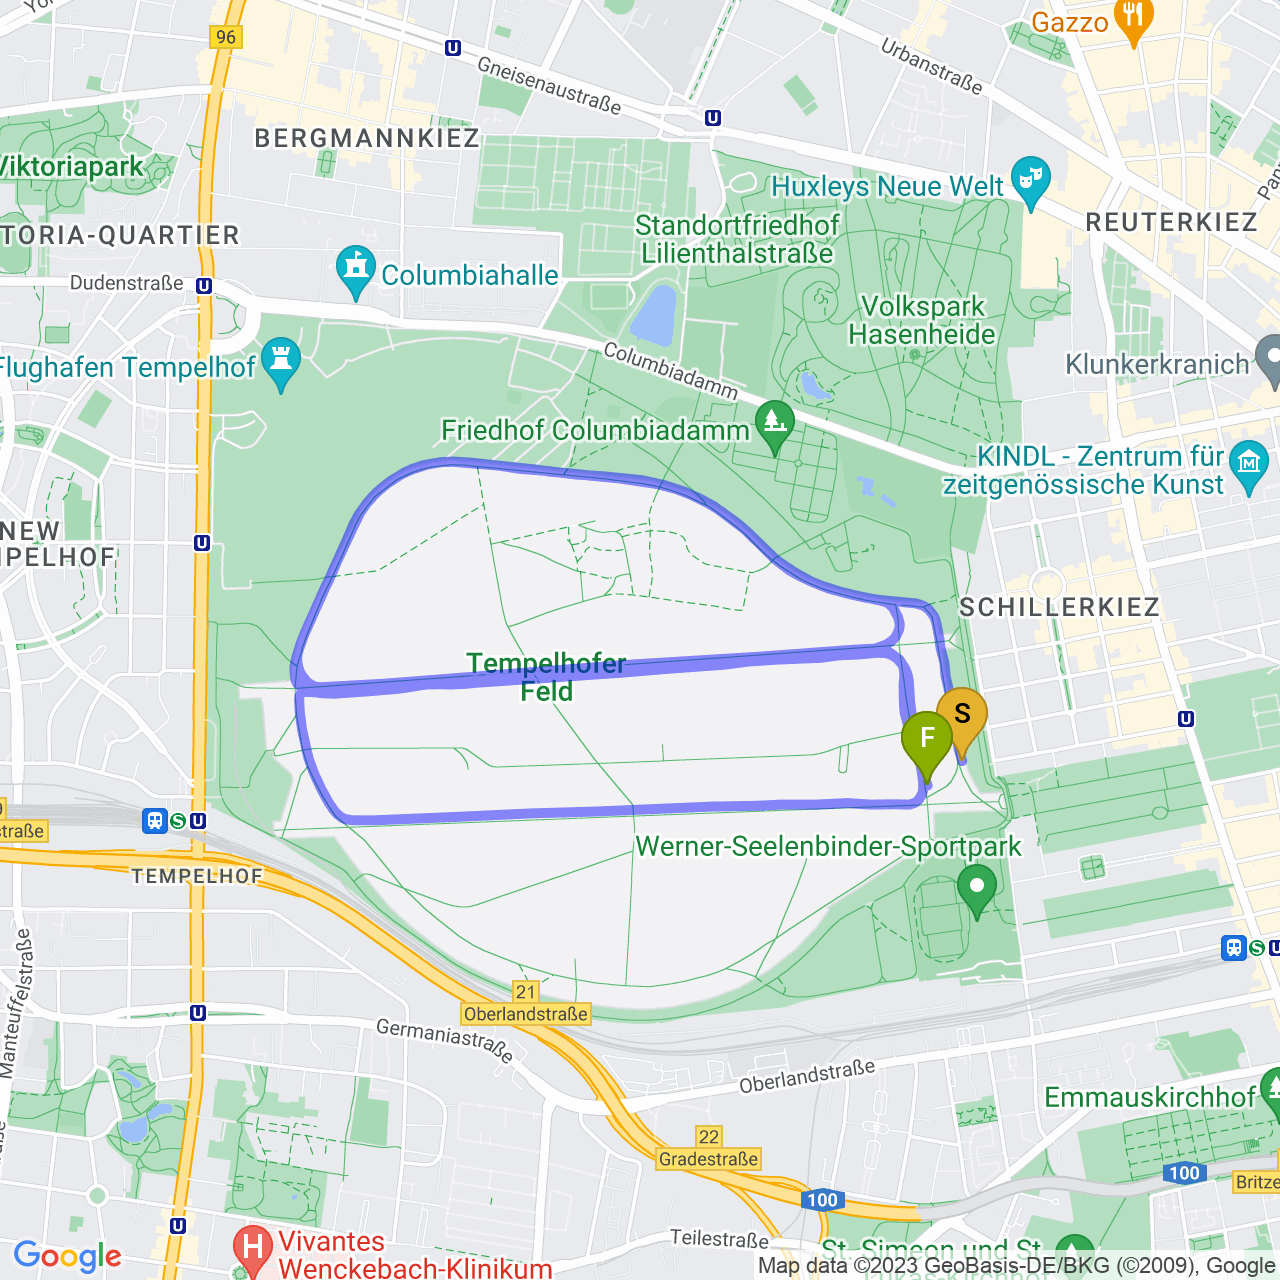 map of “unstructured” workout in Tempelhofer Feld